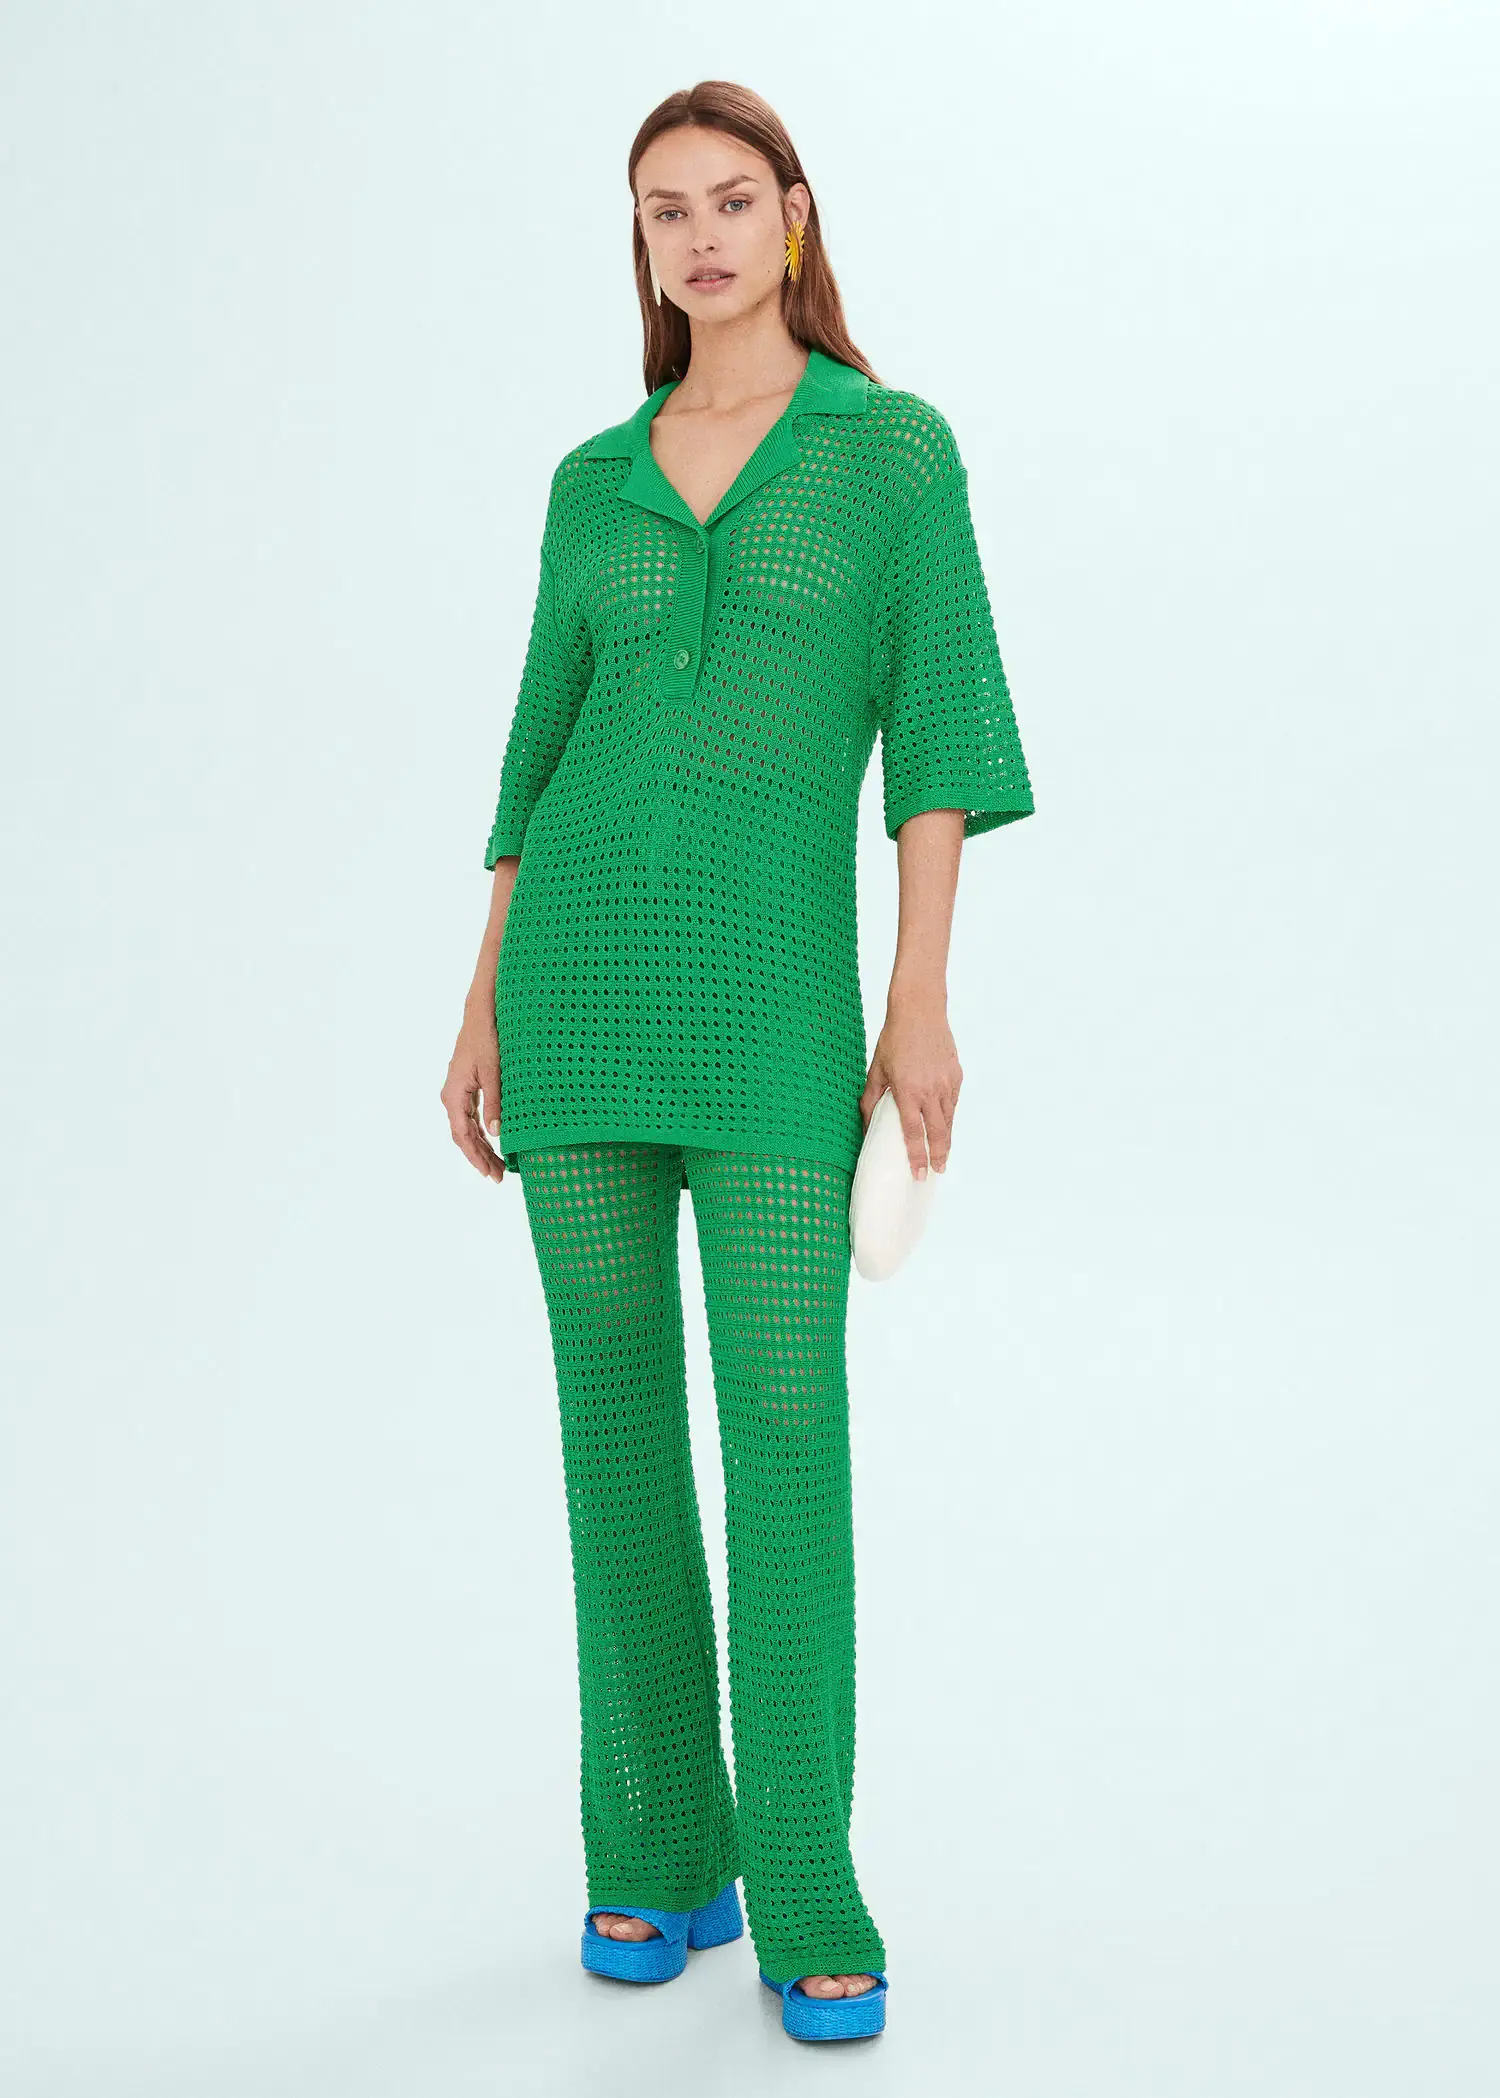 Mango Openwork knit trousers. a woman in a green outfit standing in front of a white wall. 